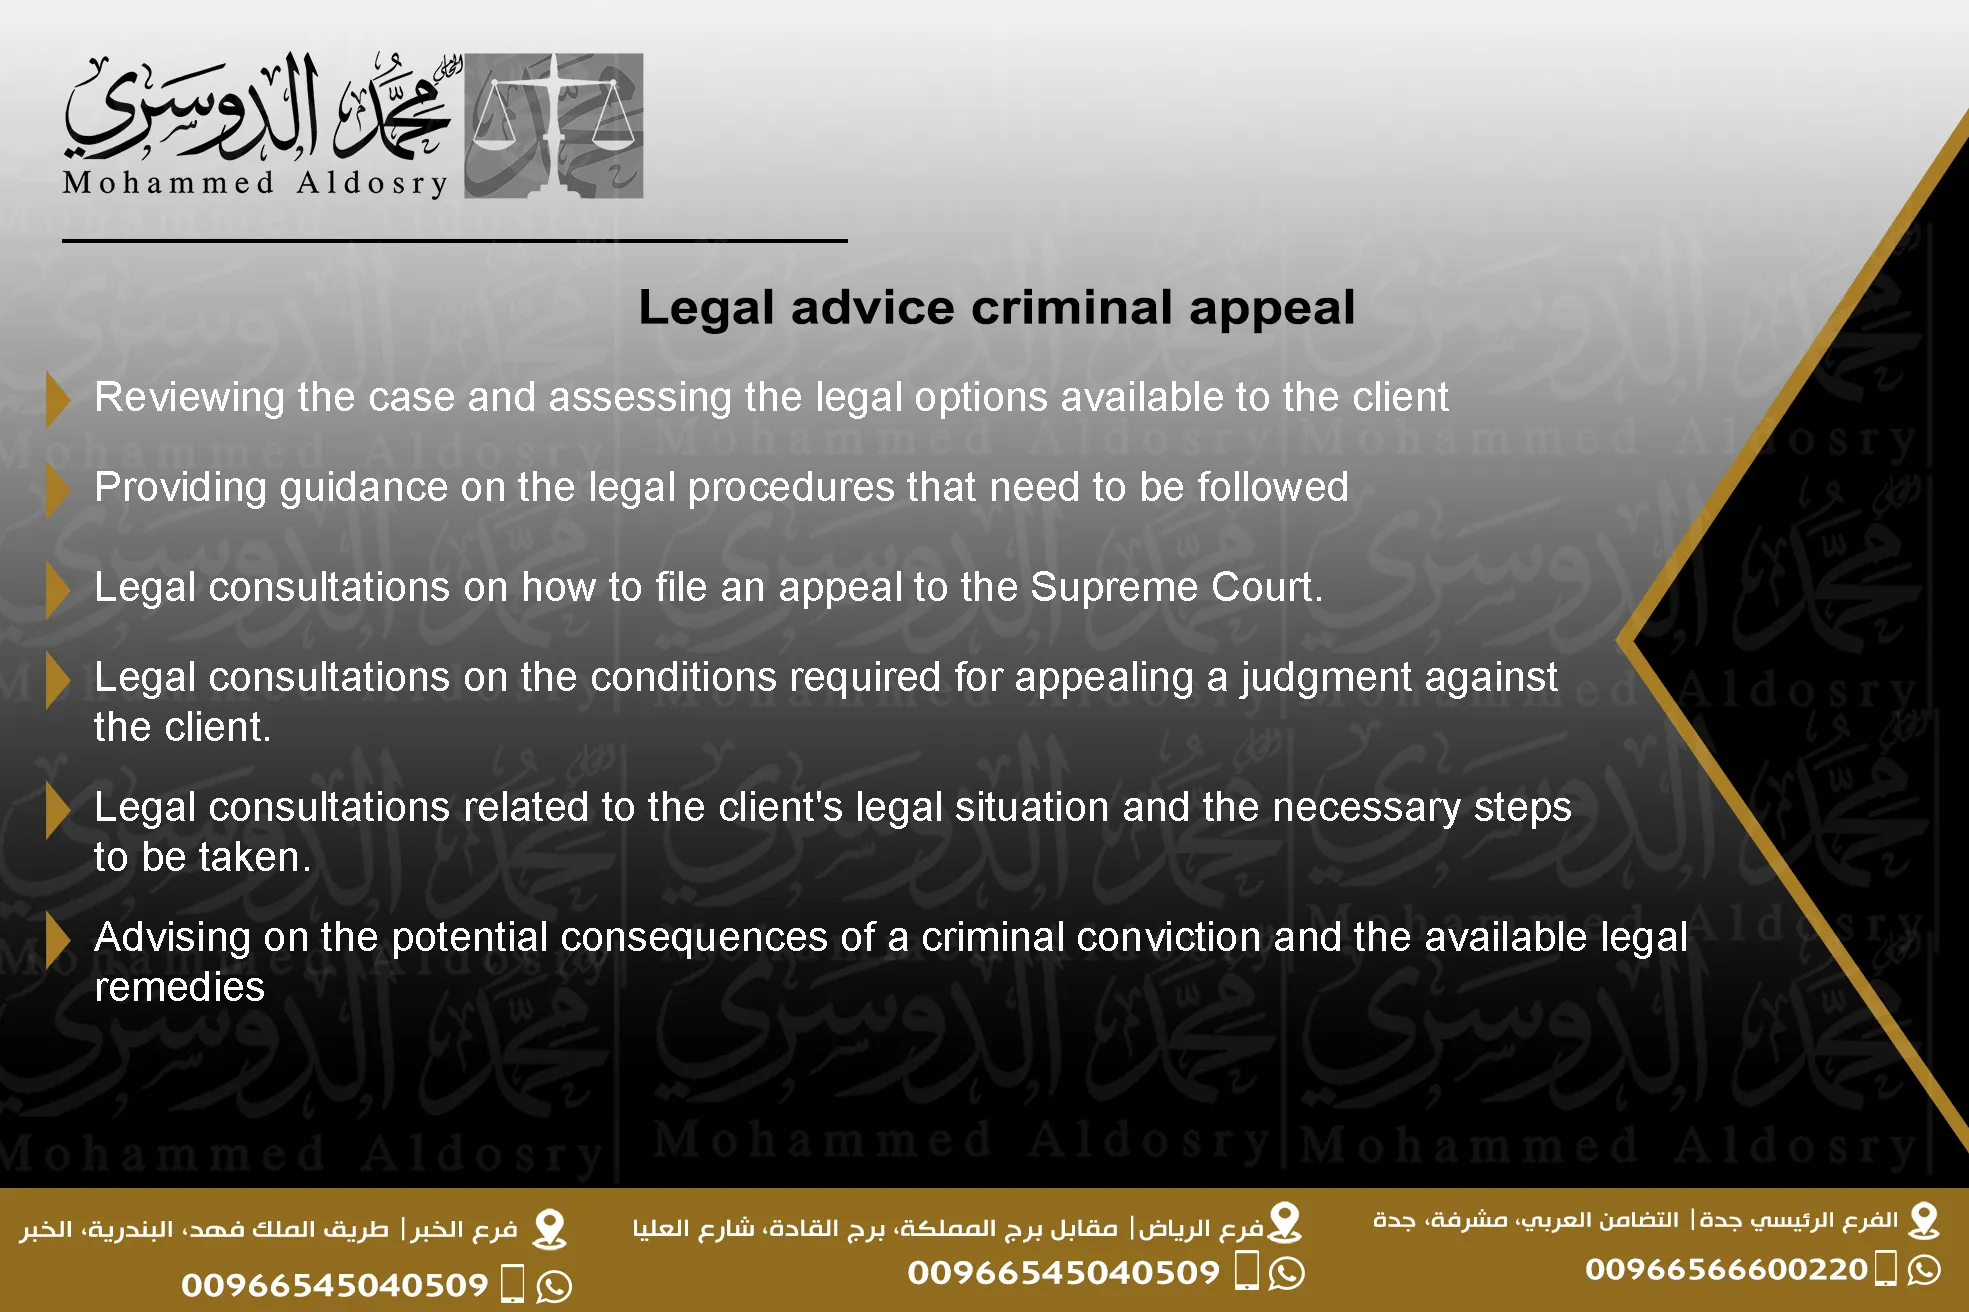 criminal appeal lawyers from Al-Dossary law firm 2023